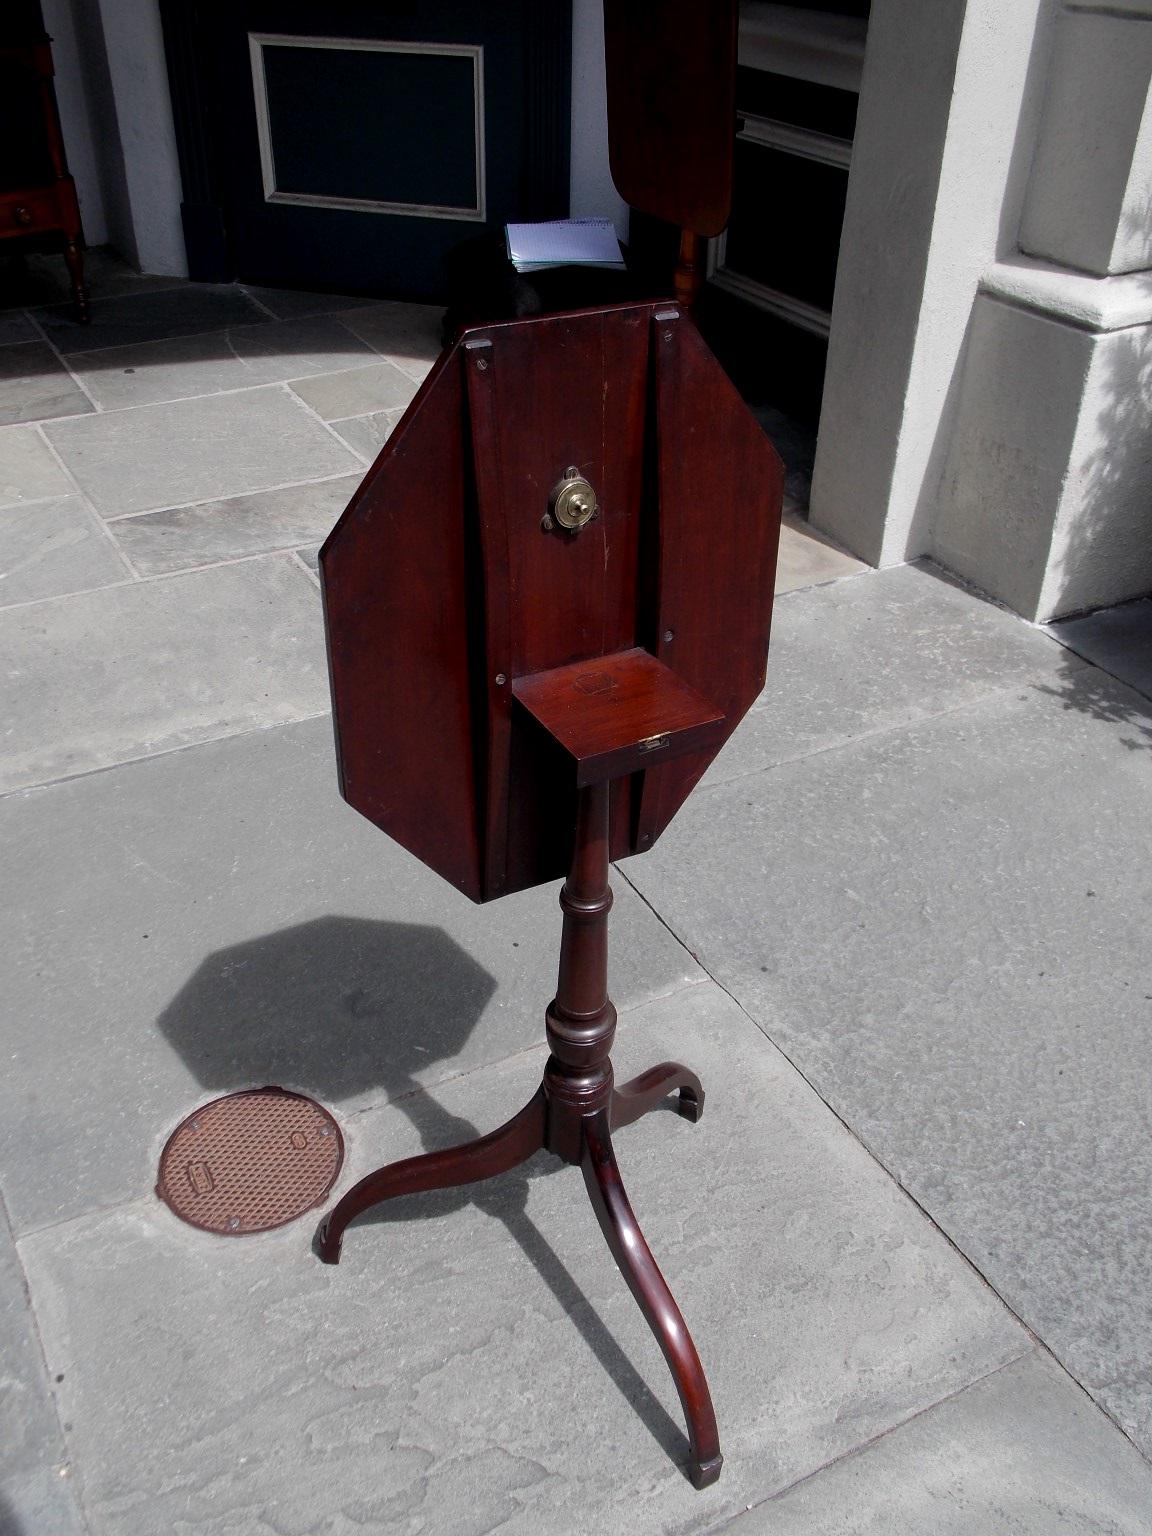  American Hepplewhite Mahogany Star Inlaid Candle Stand on Saber Legs, C. 1790 For Sale 1